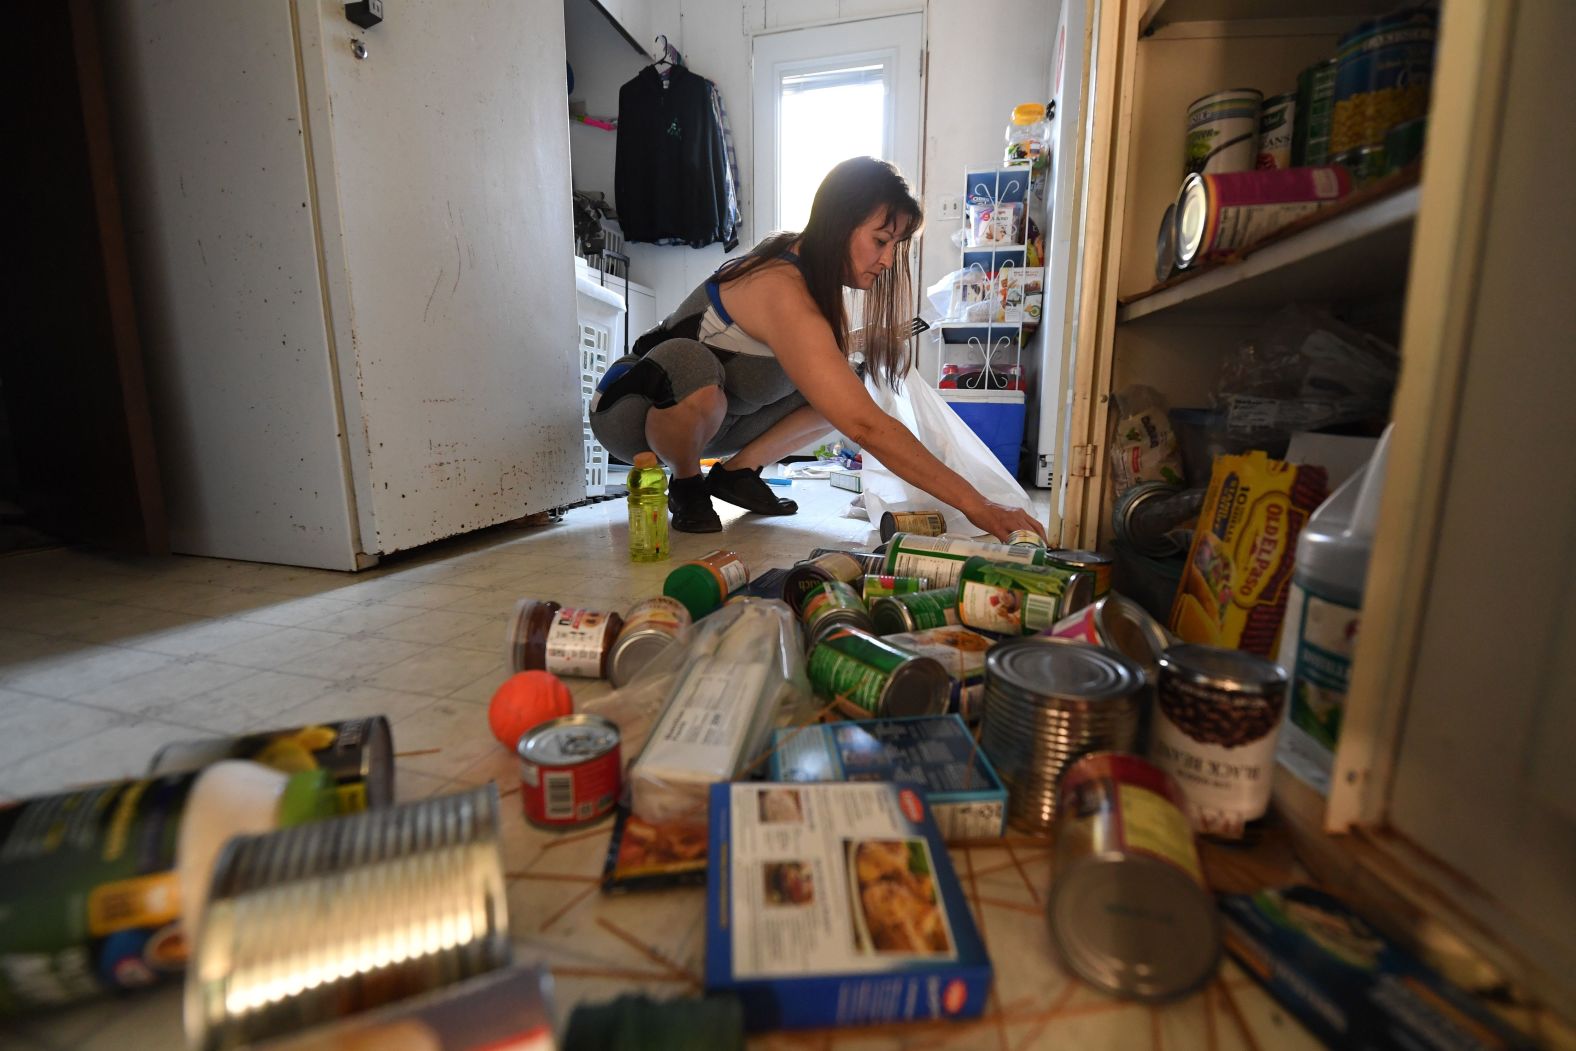 Tammy Sears cleans up her kitchen on July 6 after a magnitude 7.1 earthquake dumped food items on the floor at her mobile home in Ridgecrest.